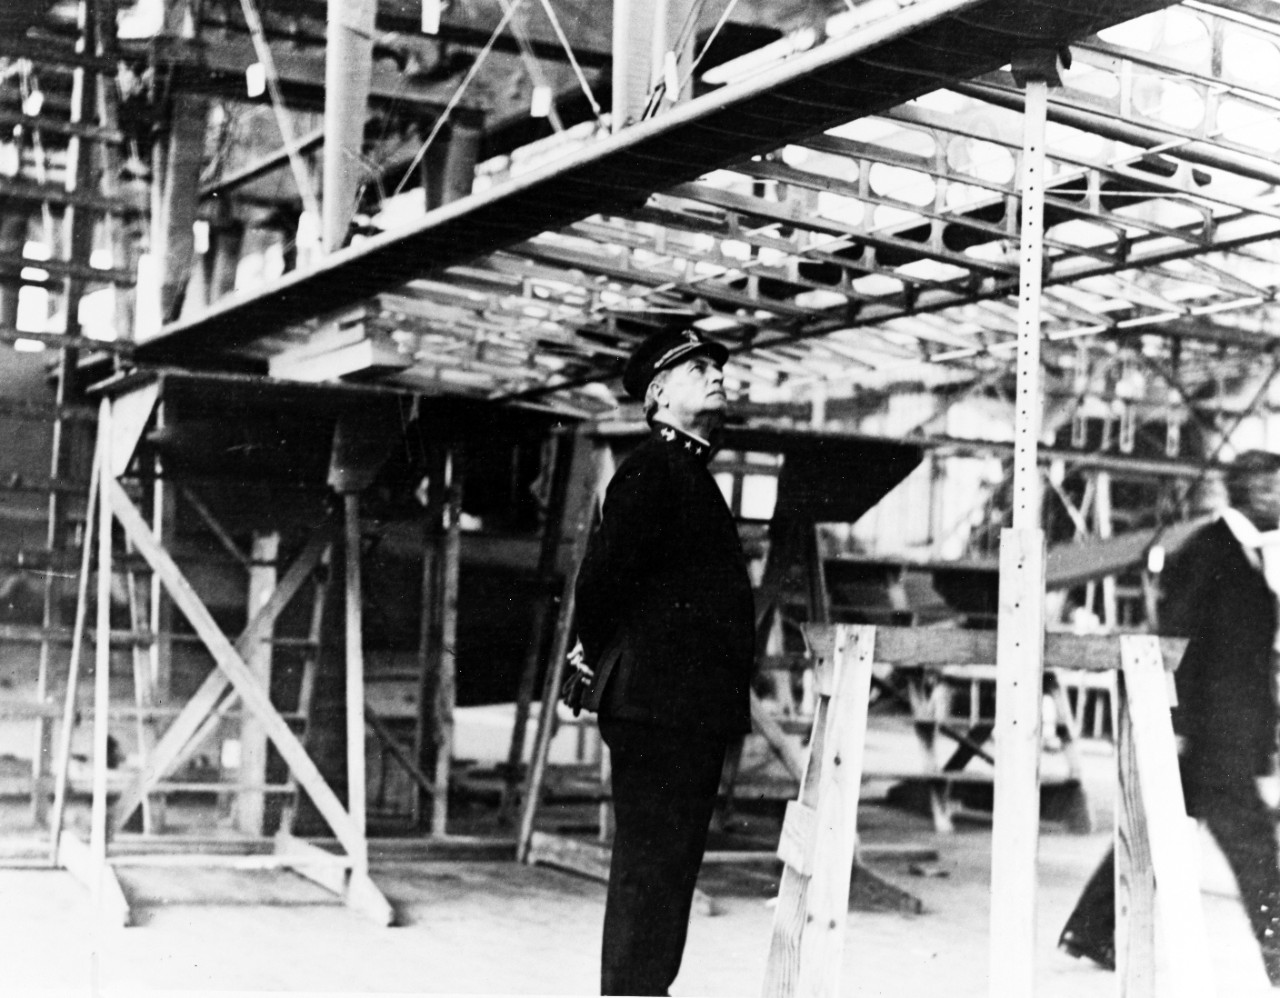 Naval officer inspecting aircraft production